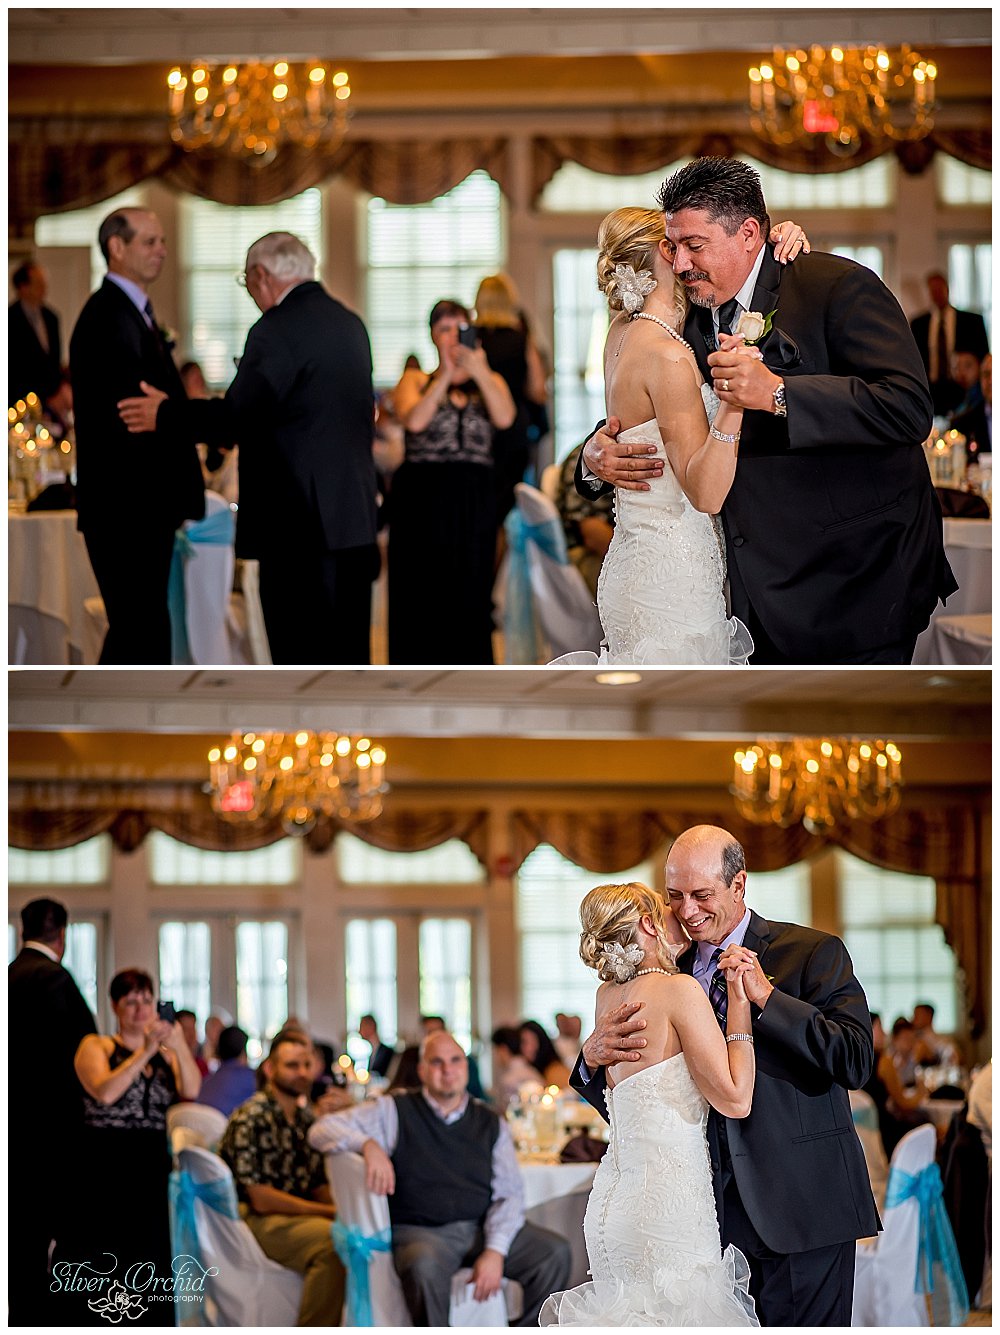 ©Silver Orchid Photography_wedding photography_CantandoBrooksideMacungie_silverorchidphotography.com_0099.jpg